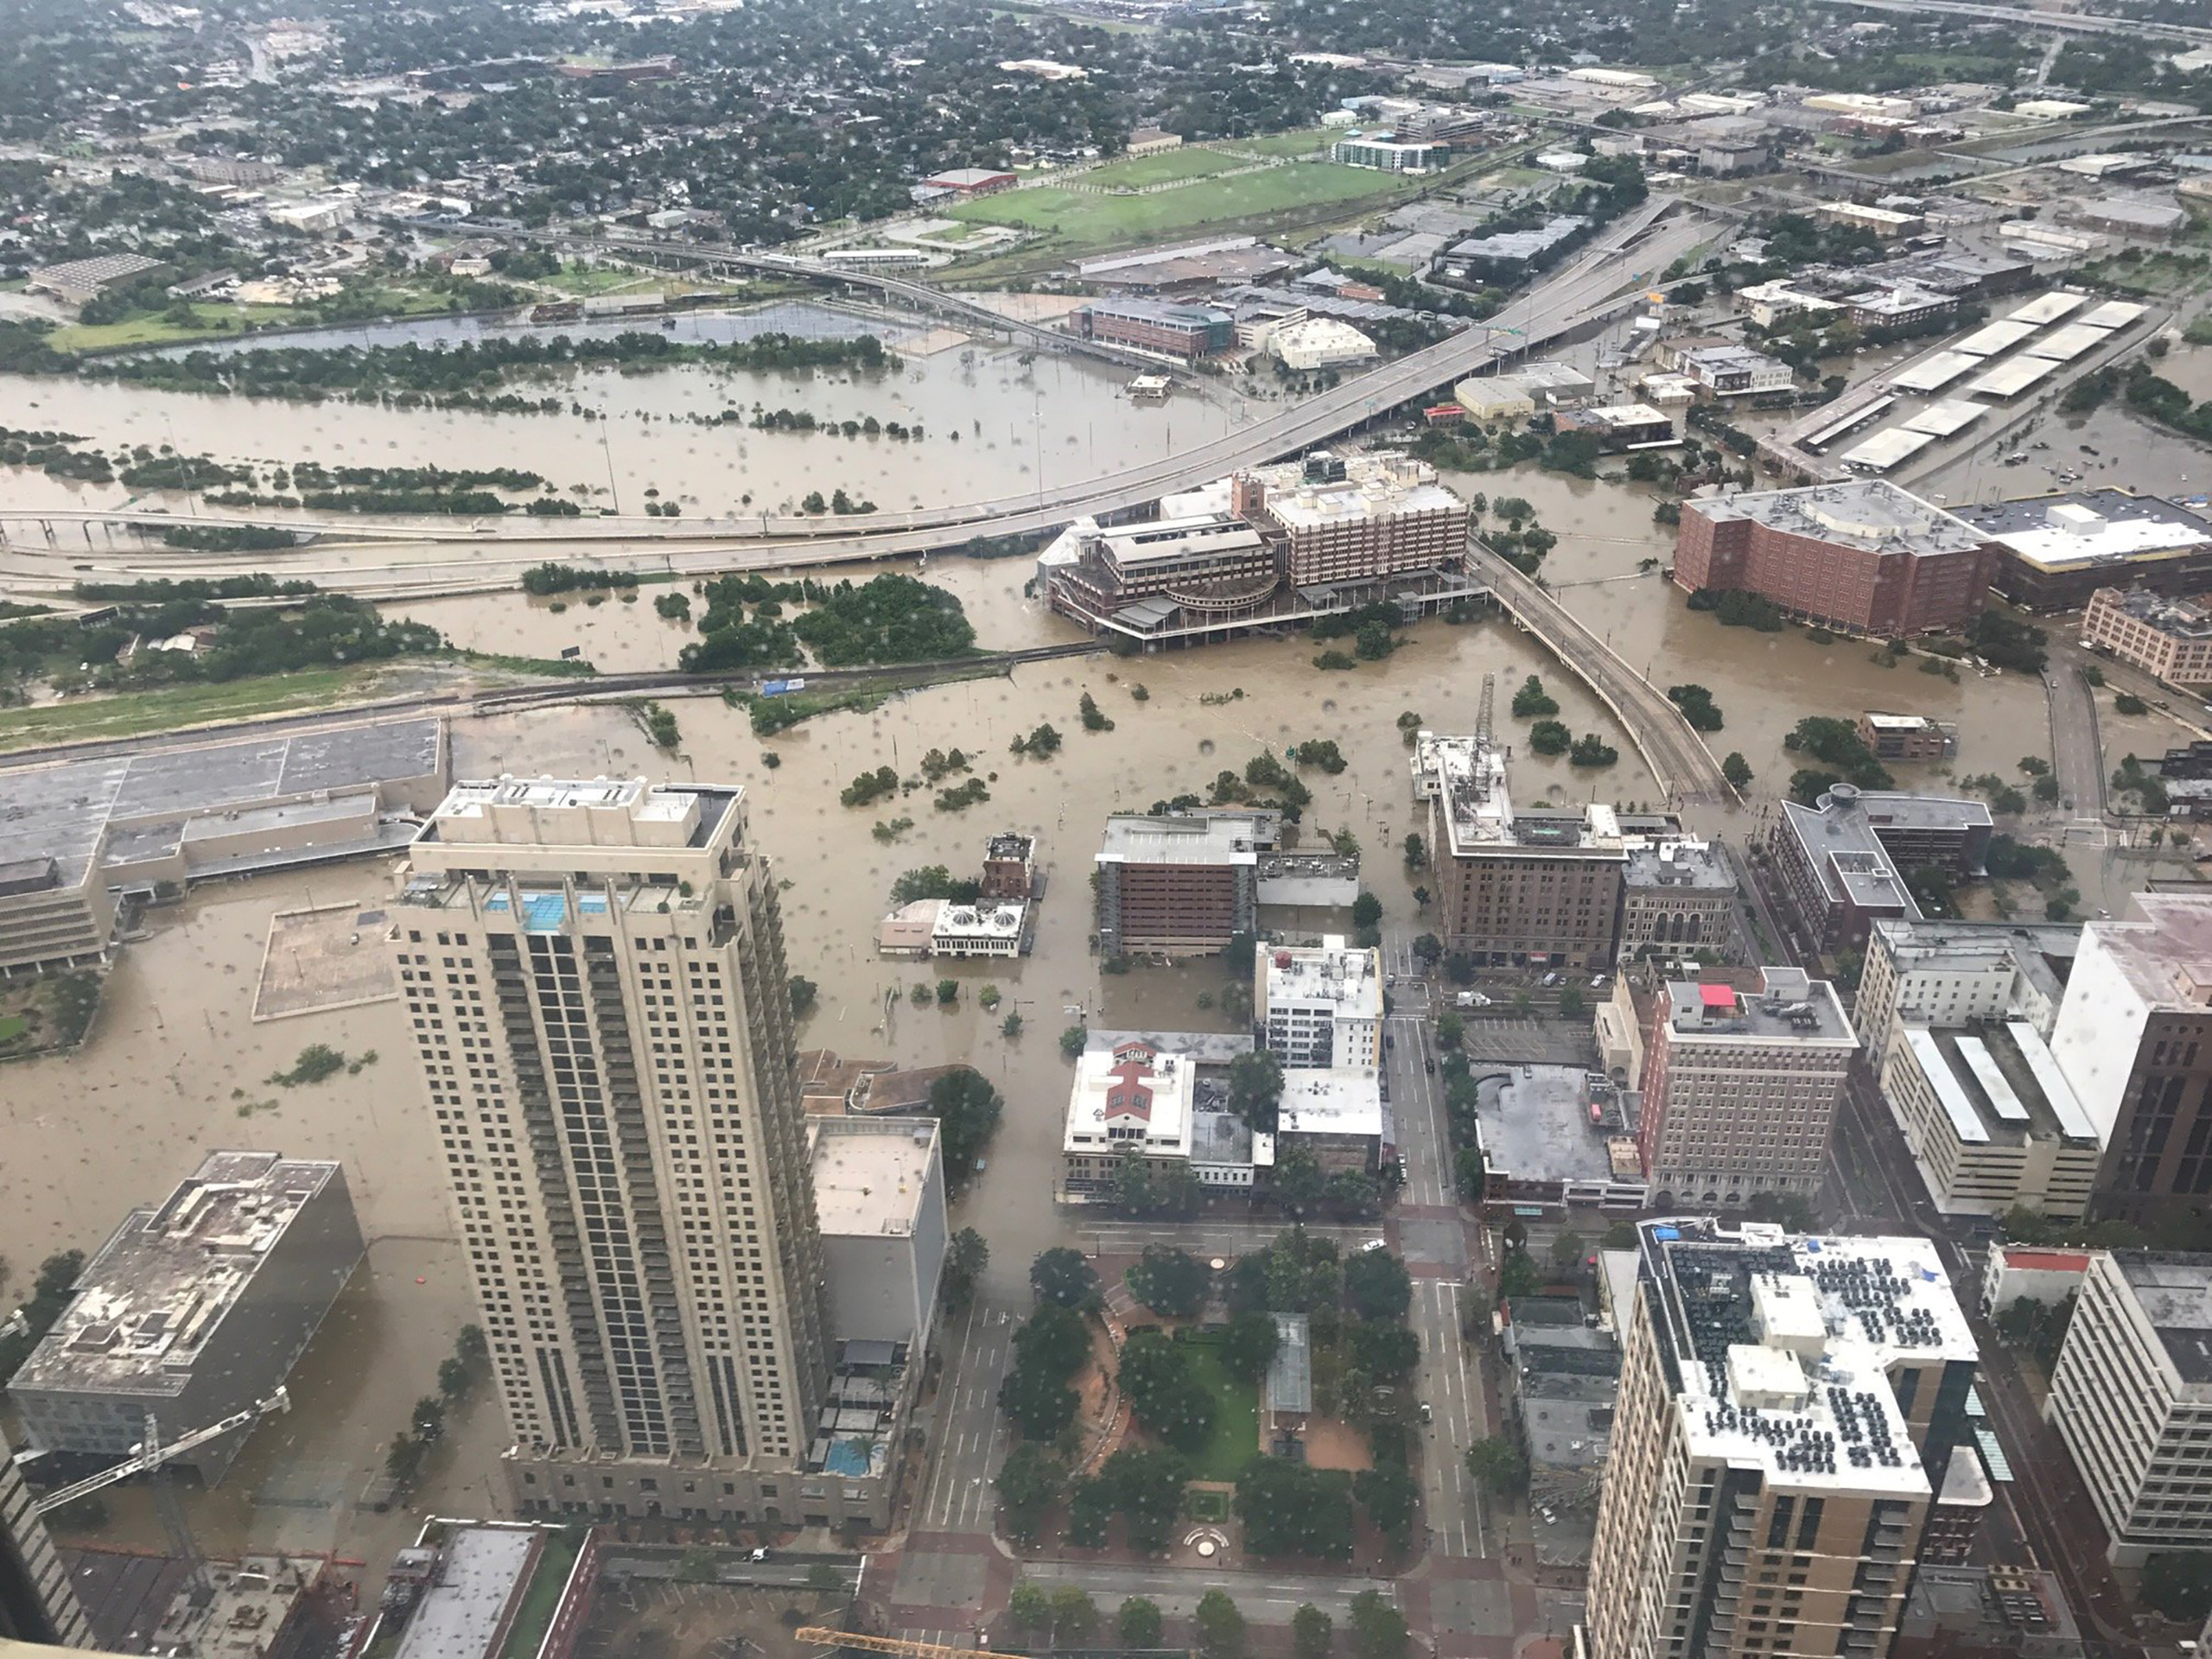 Flooded downtown is seen from JP Morgan Chase Tower after Hurricane Harvey inundated the Texas Gulf coast with rain causing widespread flooding, in Houston, Texas, U.S. August 27, 2017 in this picture obtained from social media.